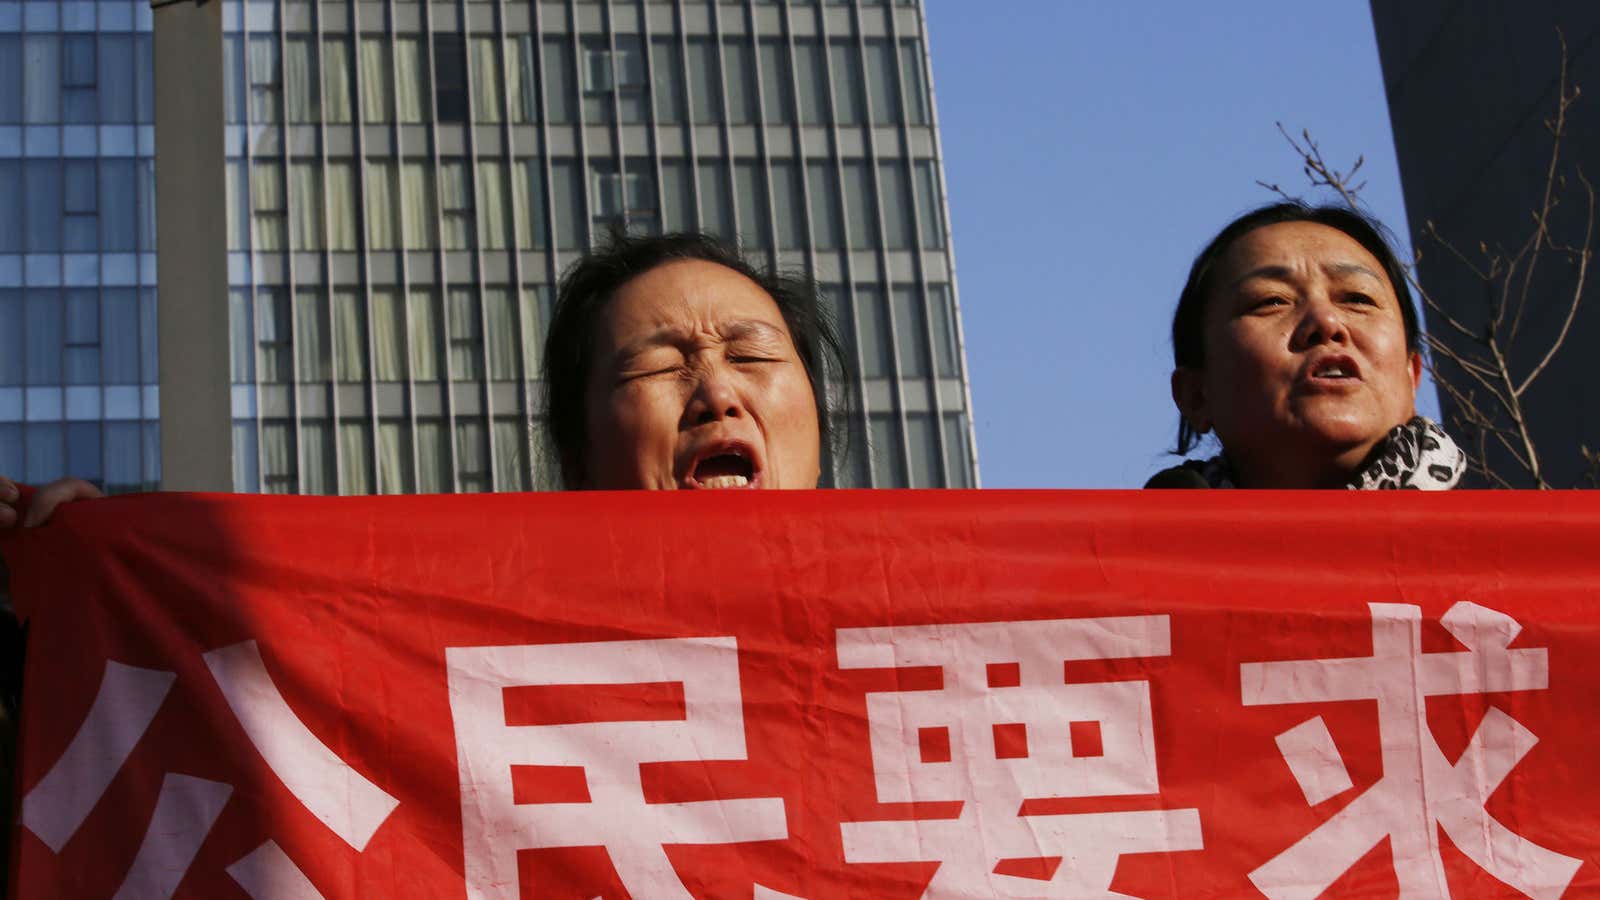 Protesters at the trial of Chinese activist Xu Zhiyong.